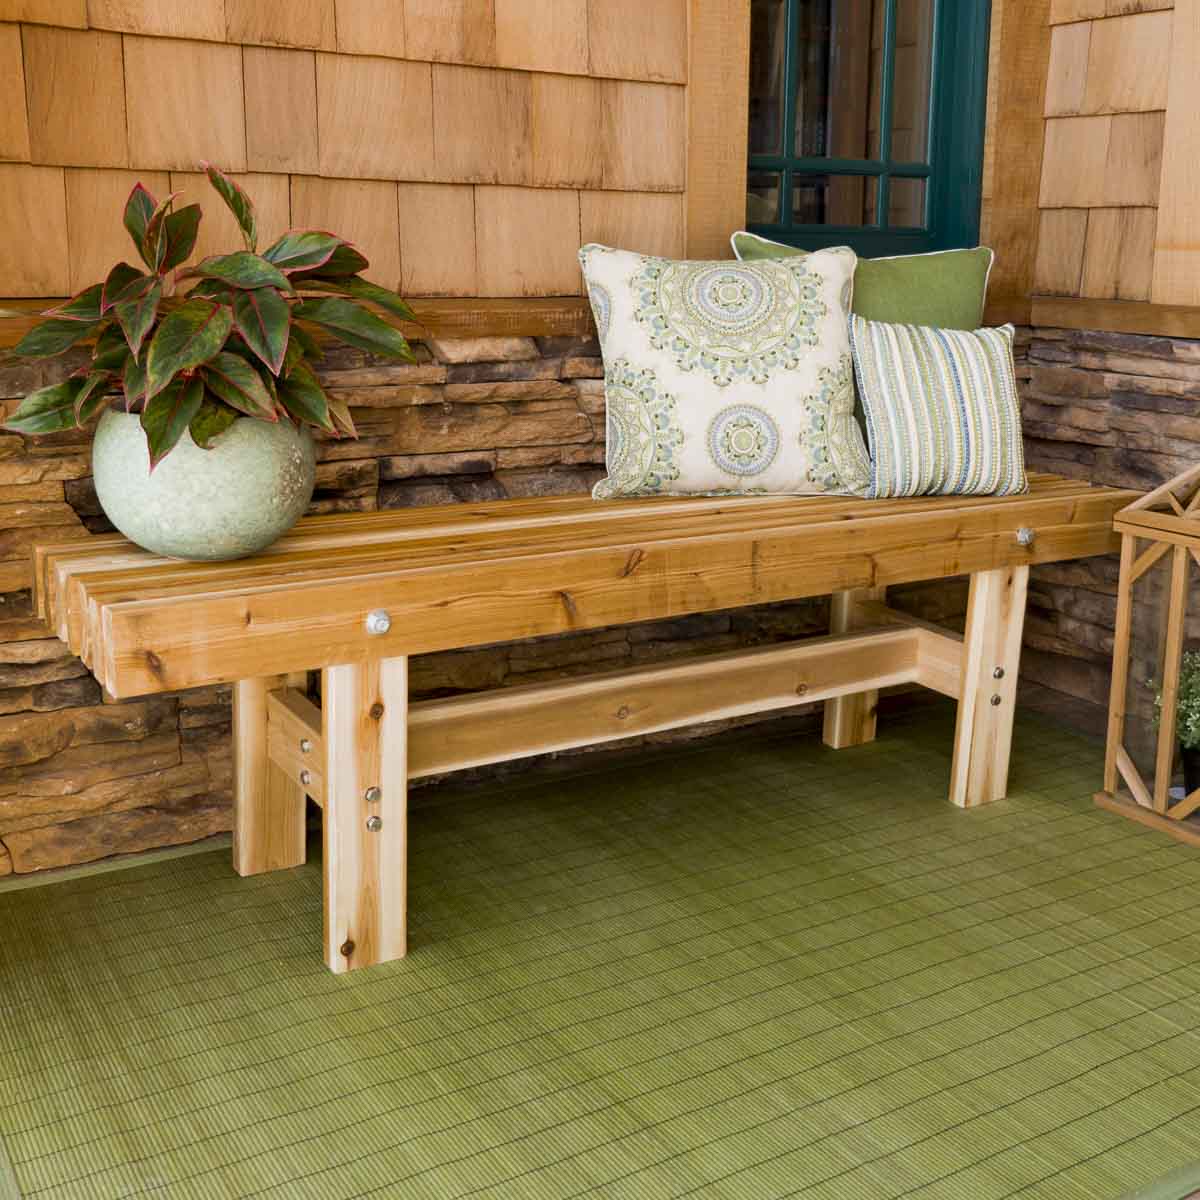 18 Awesome Outdoor Woodworking Projects You Can Make Yourself